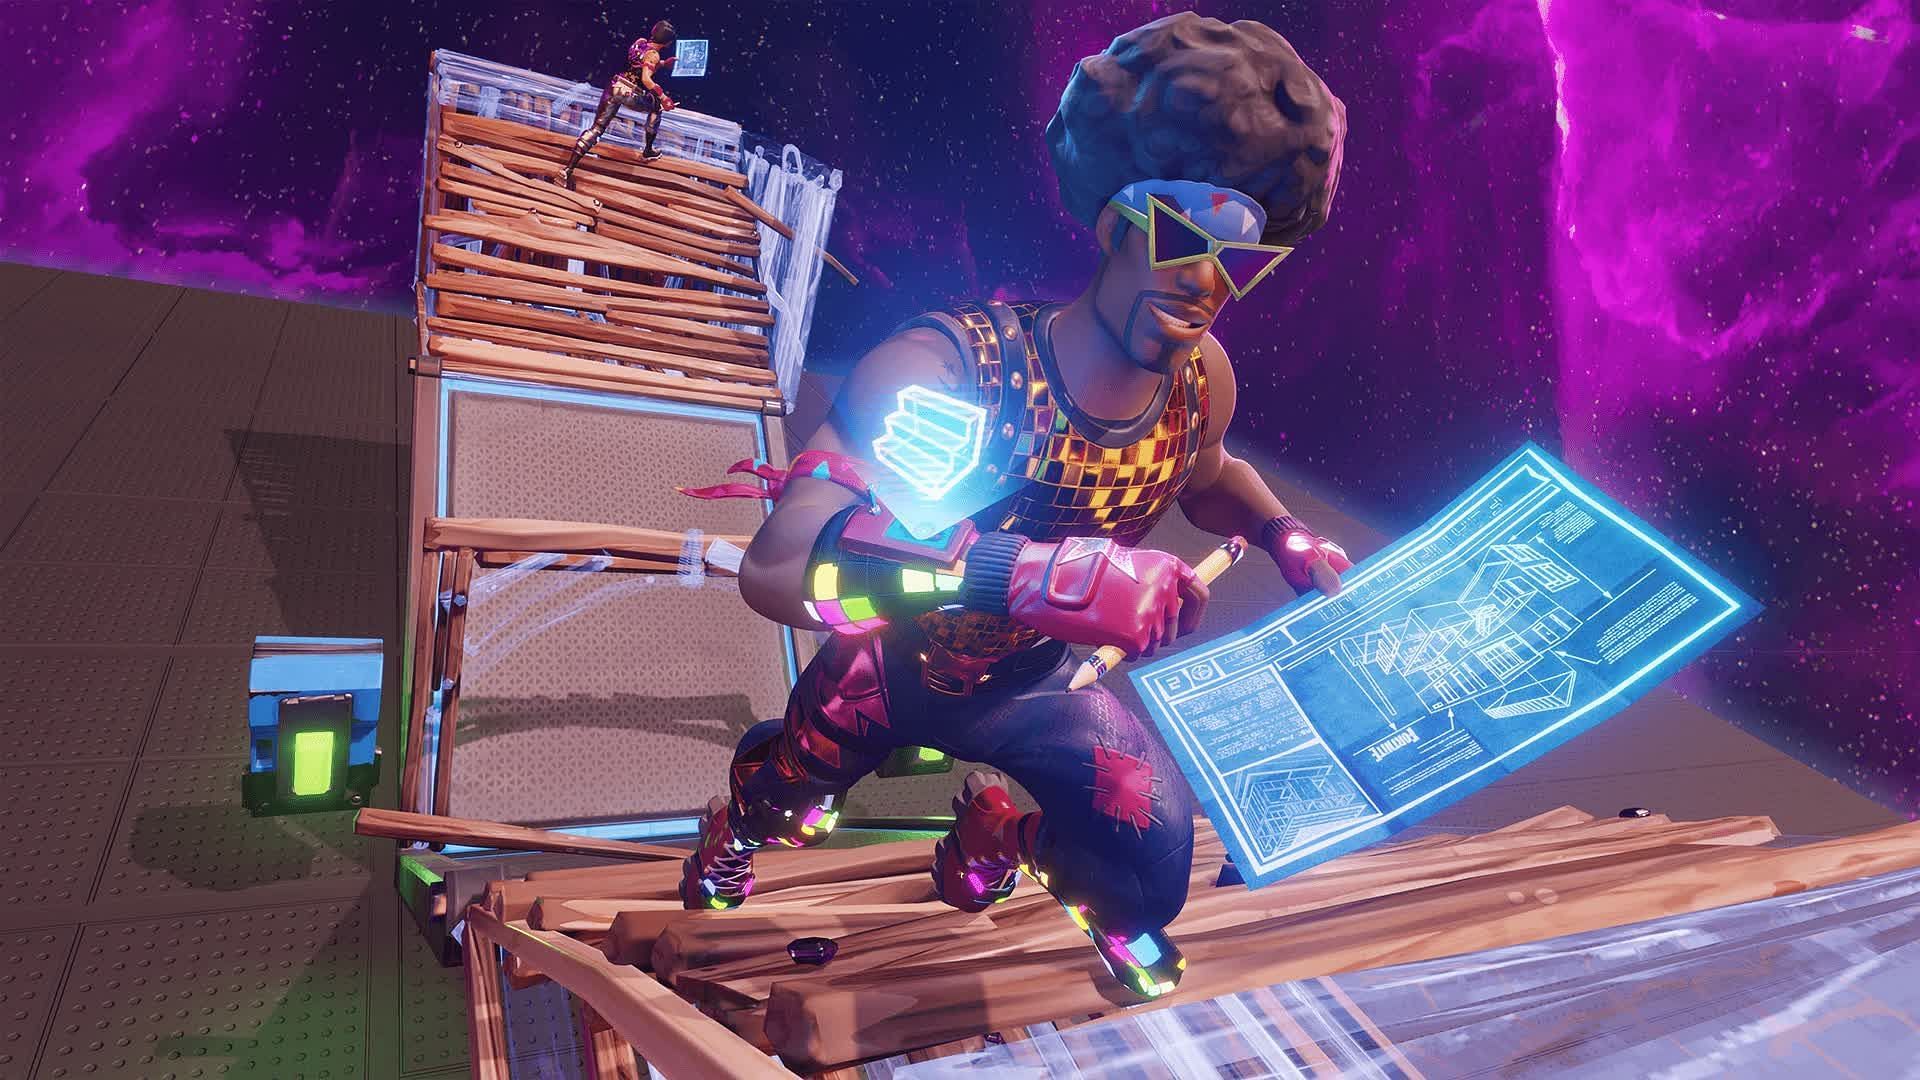 Another build fight is among the most popular Fortnite Creative maps (Image via Epic Games)